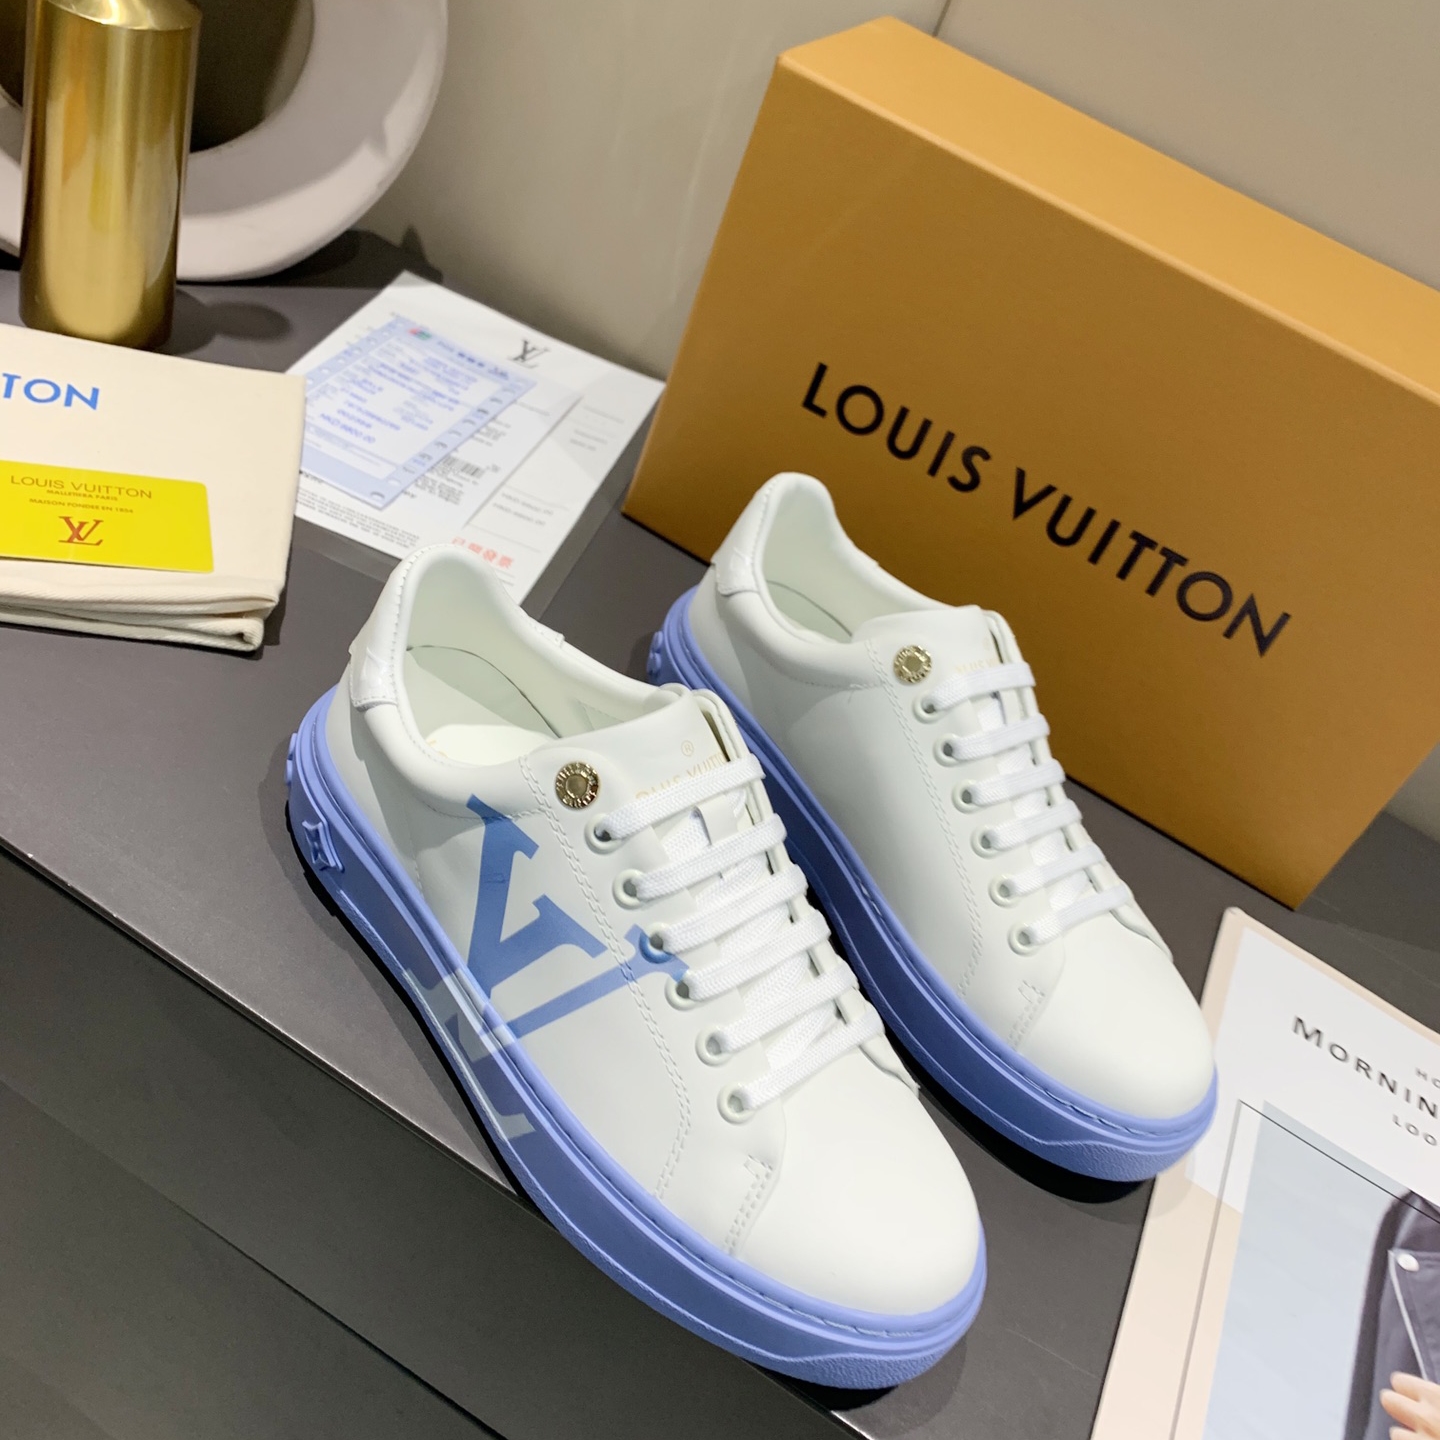 Louis Vuitton men’s shoes, LV sneakers, LV sports shoes, let us see this designers sneakers